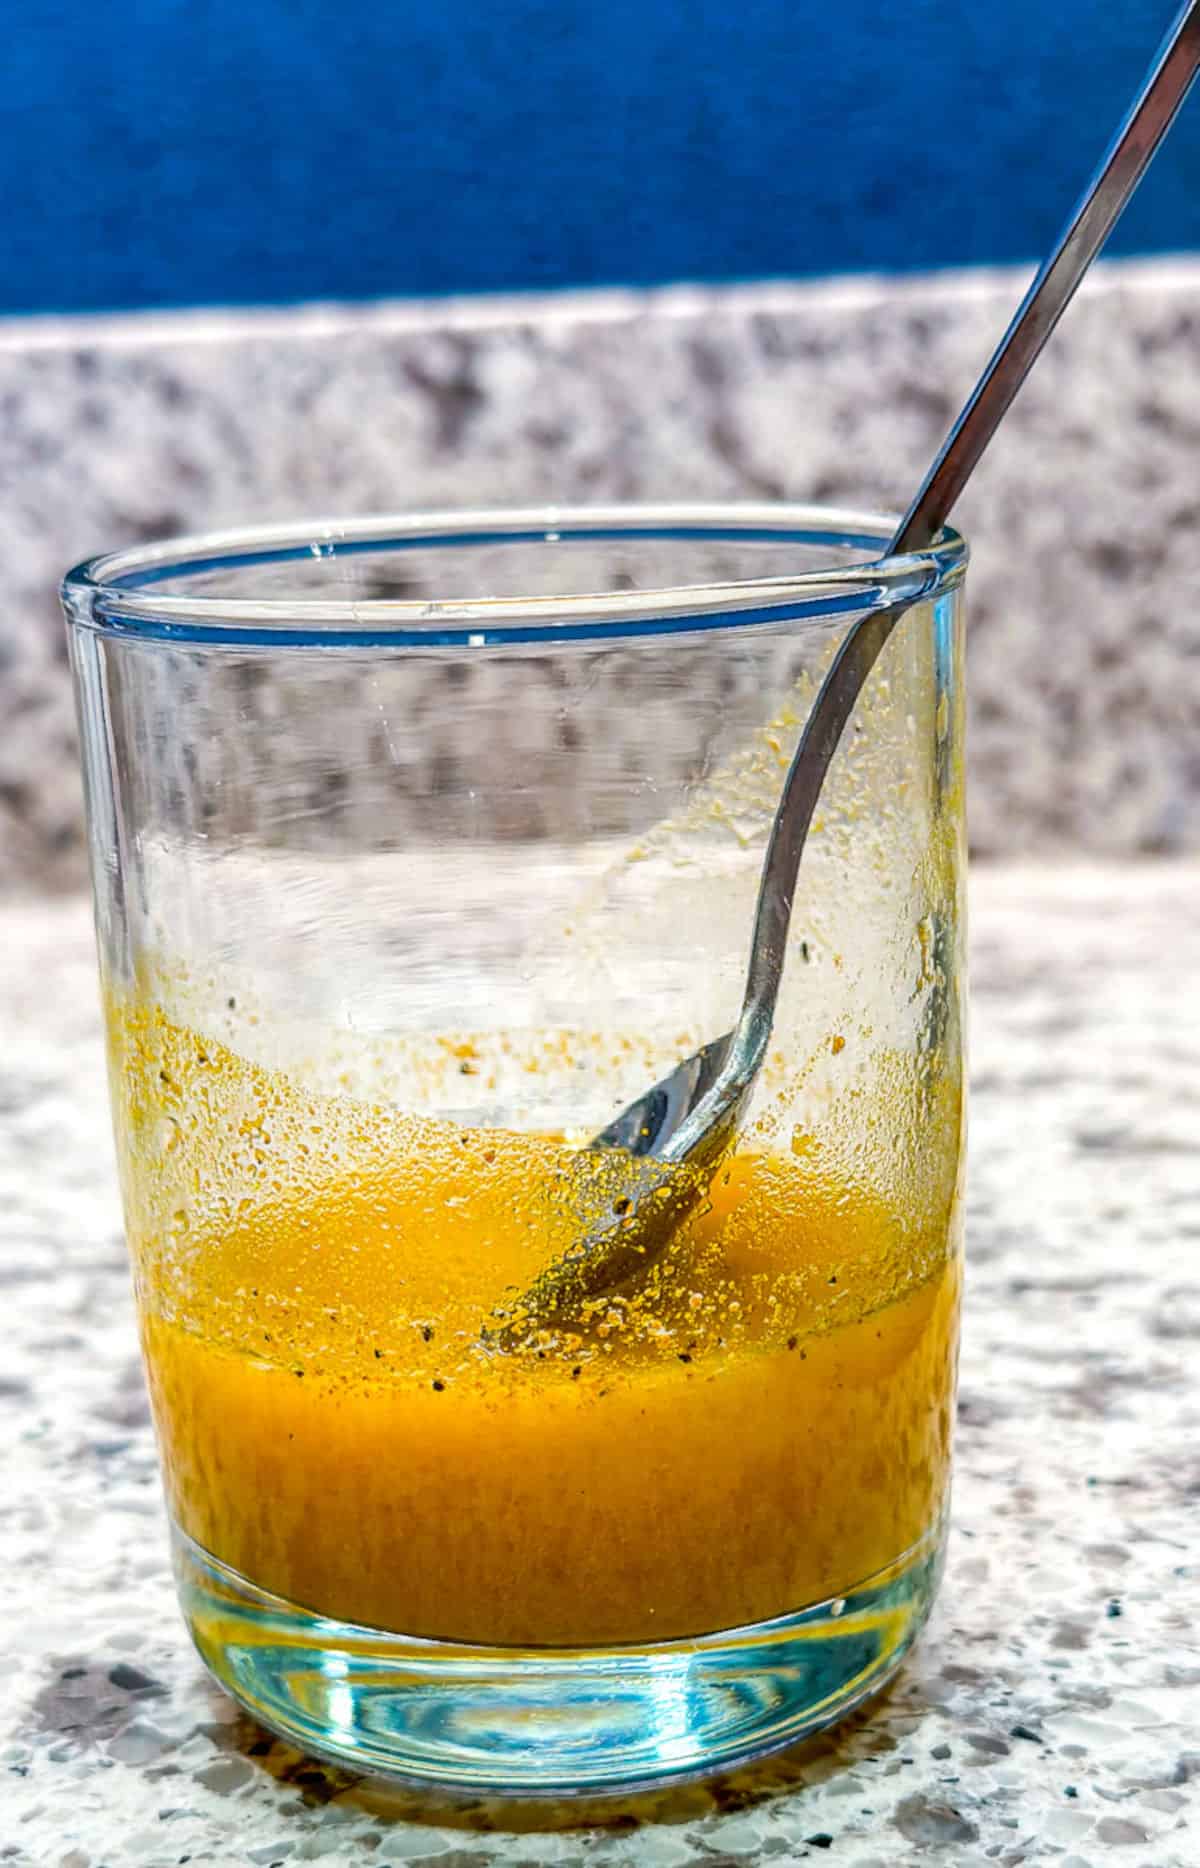 A glass cup with a spoon in it that is one quarter full of orange colored turmeric lemon juice with pepper and turmeric powder on the sides from stirring.